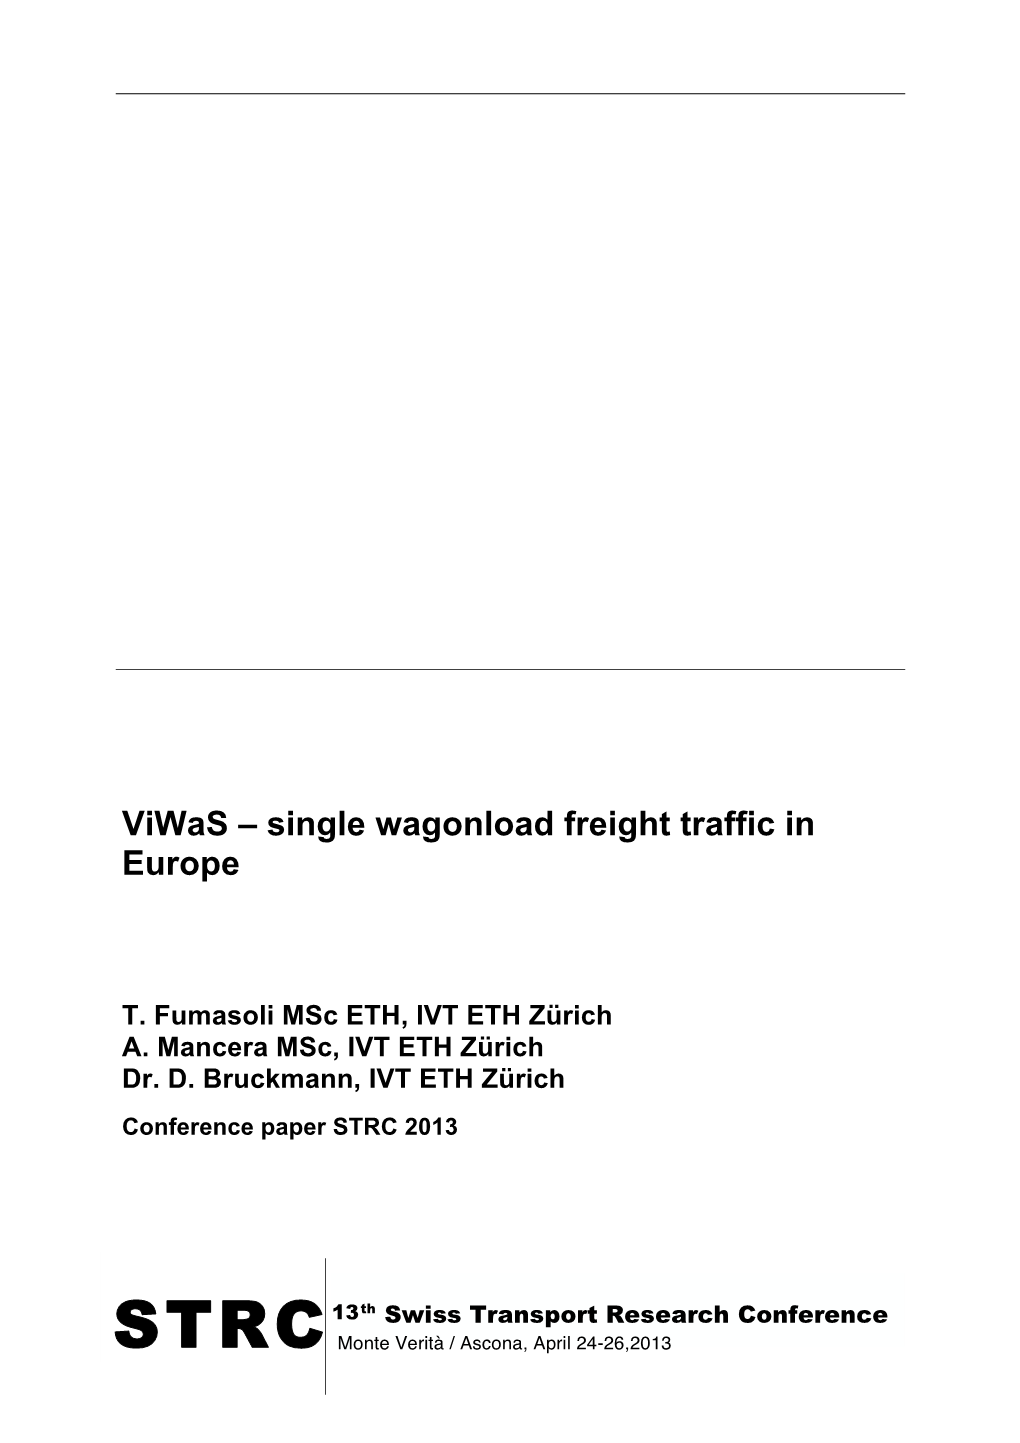 Single Wagonload Freight Traffic in Europe